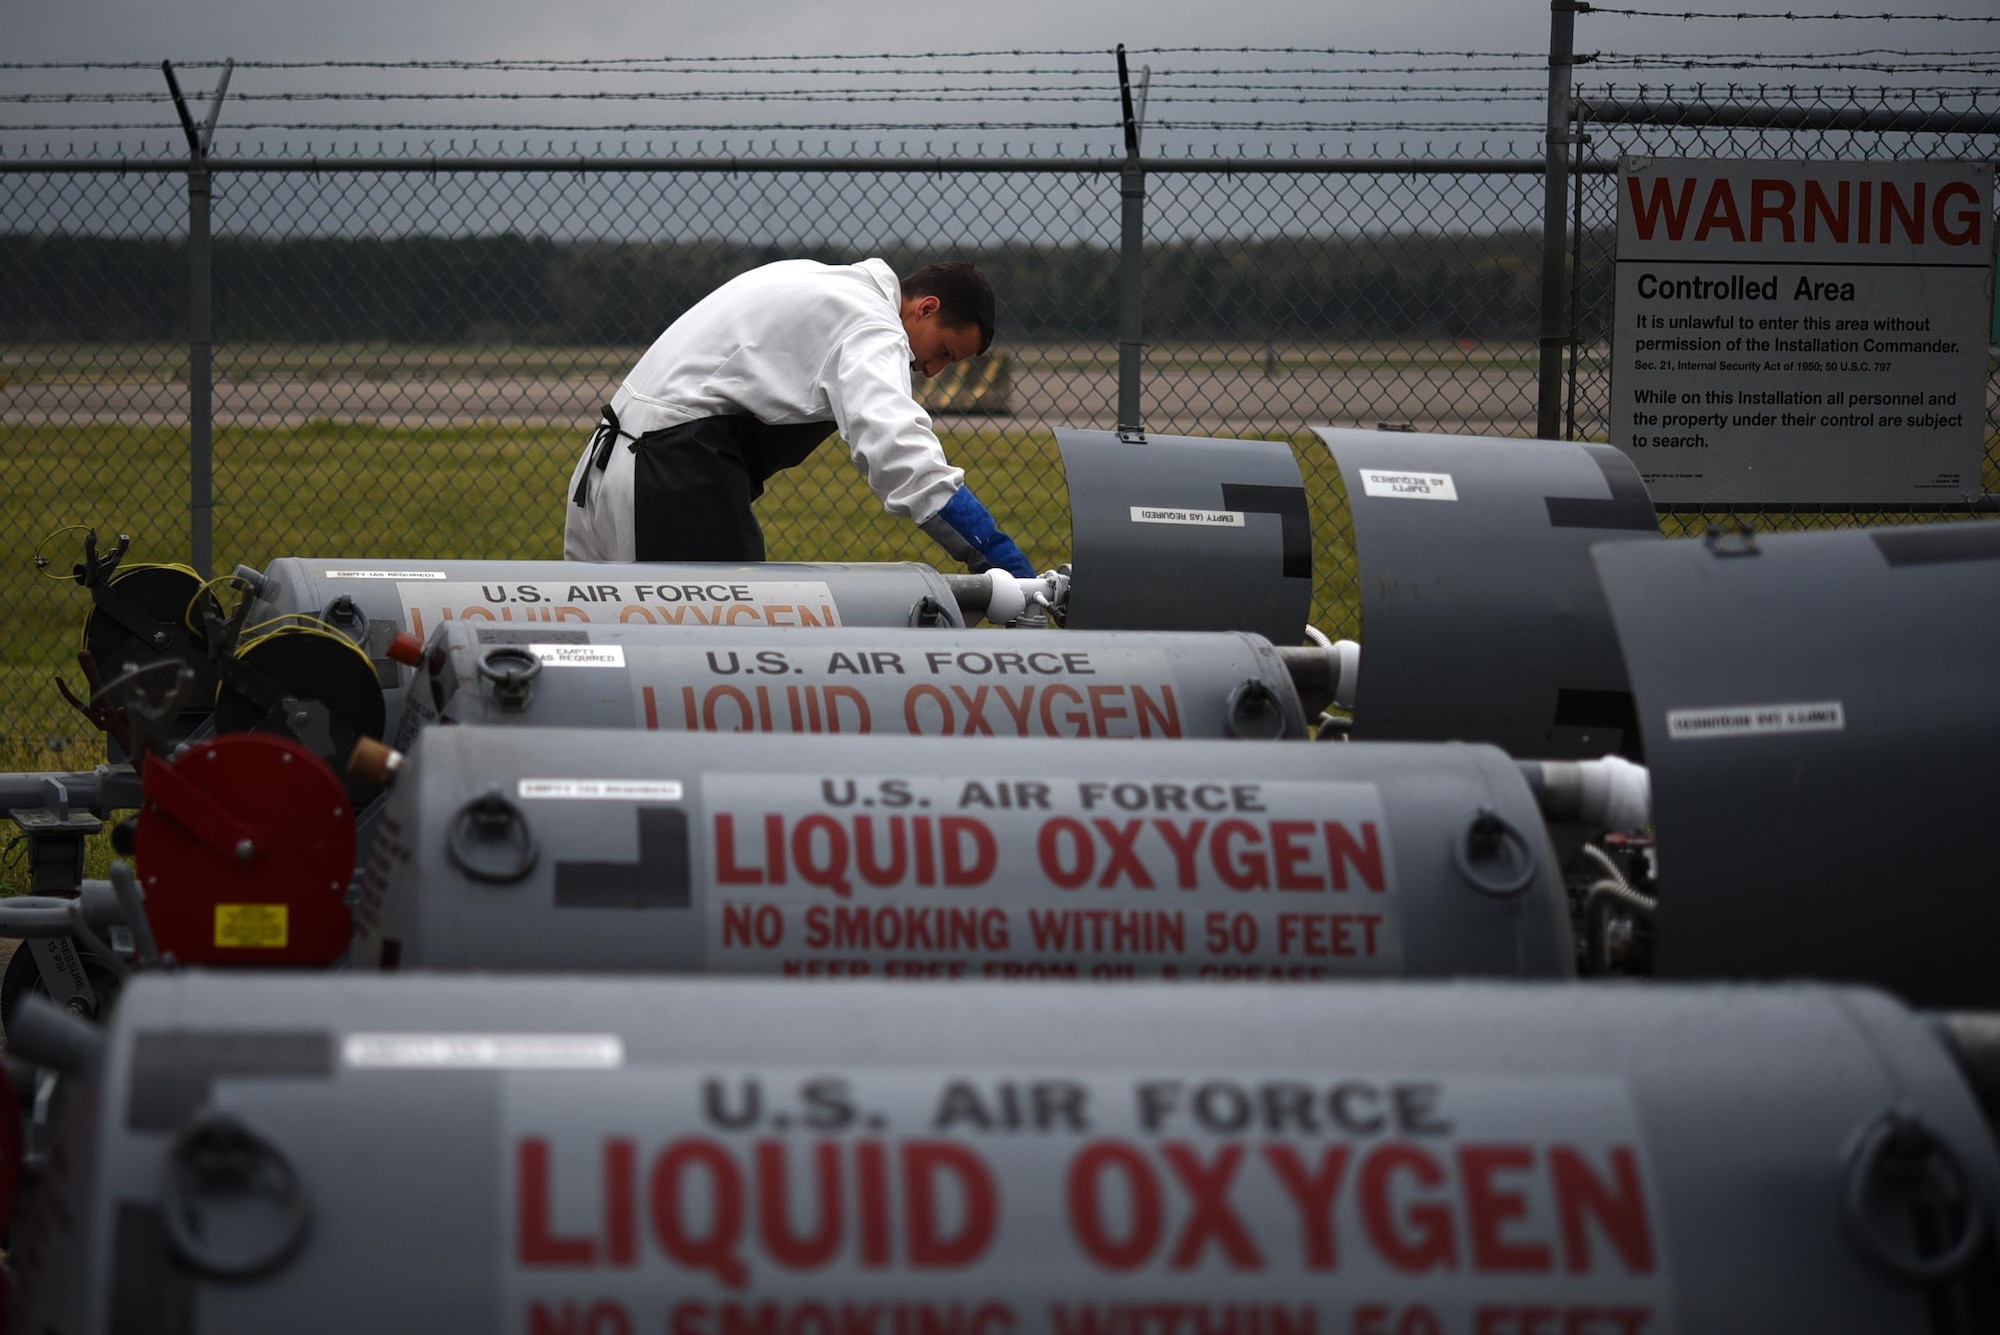 U.S. Air Force Senior Airman Richard Hayes, 19th Logistics Readiness Squadron fuel cryogenics journeyman, opens a vent valve to release excess pressure within liquid oxygen carts March 27, 2017, at Little Rock Air Force Base, Ark. Cryogenic Airmen fill and maintain containers with liquid oxygen to provide fresh air to pilots in flight. (U.S. Air Force photo by Airman 1st Class Kevin Sommer Giron)